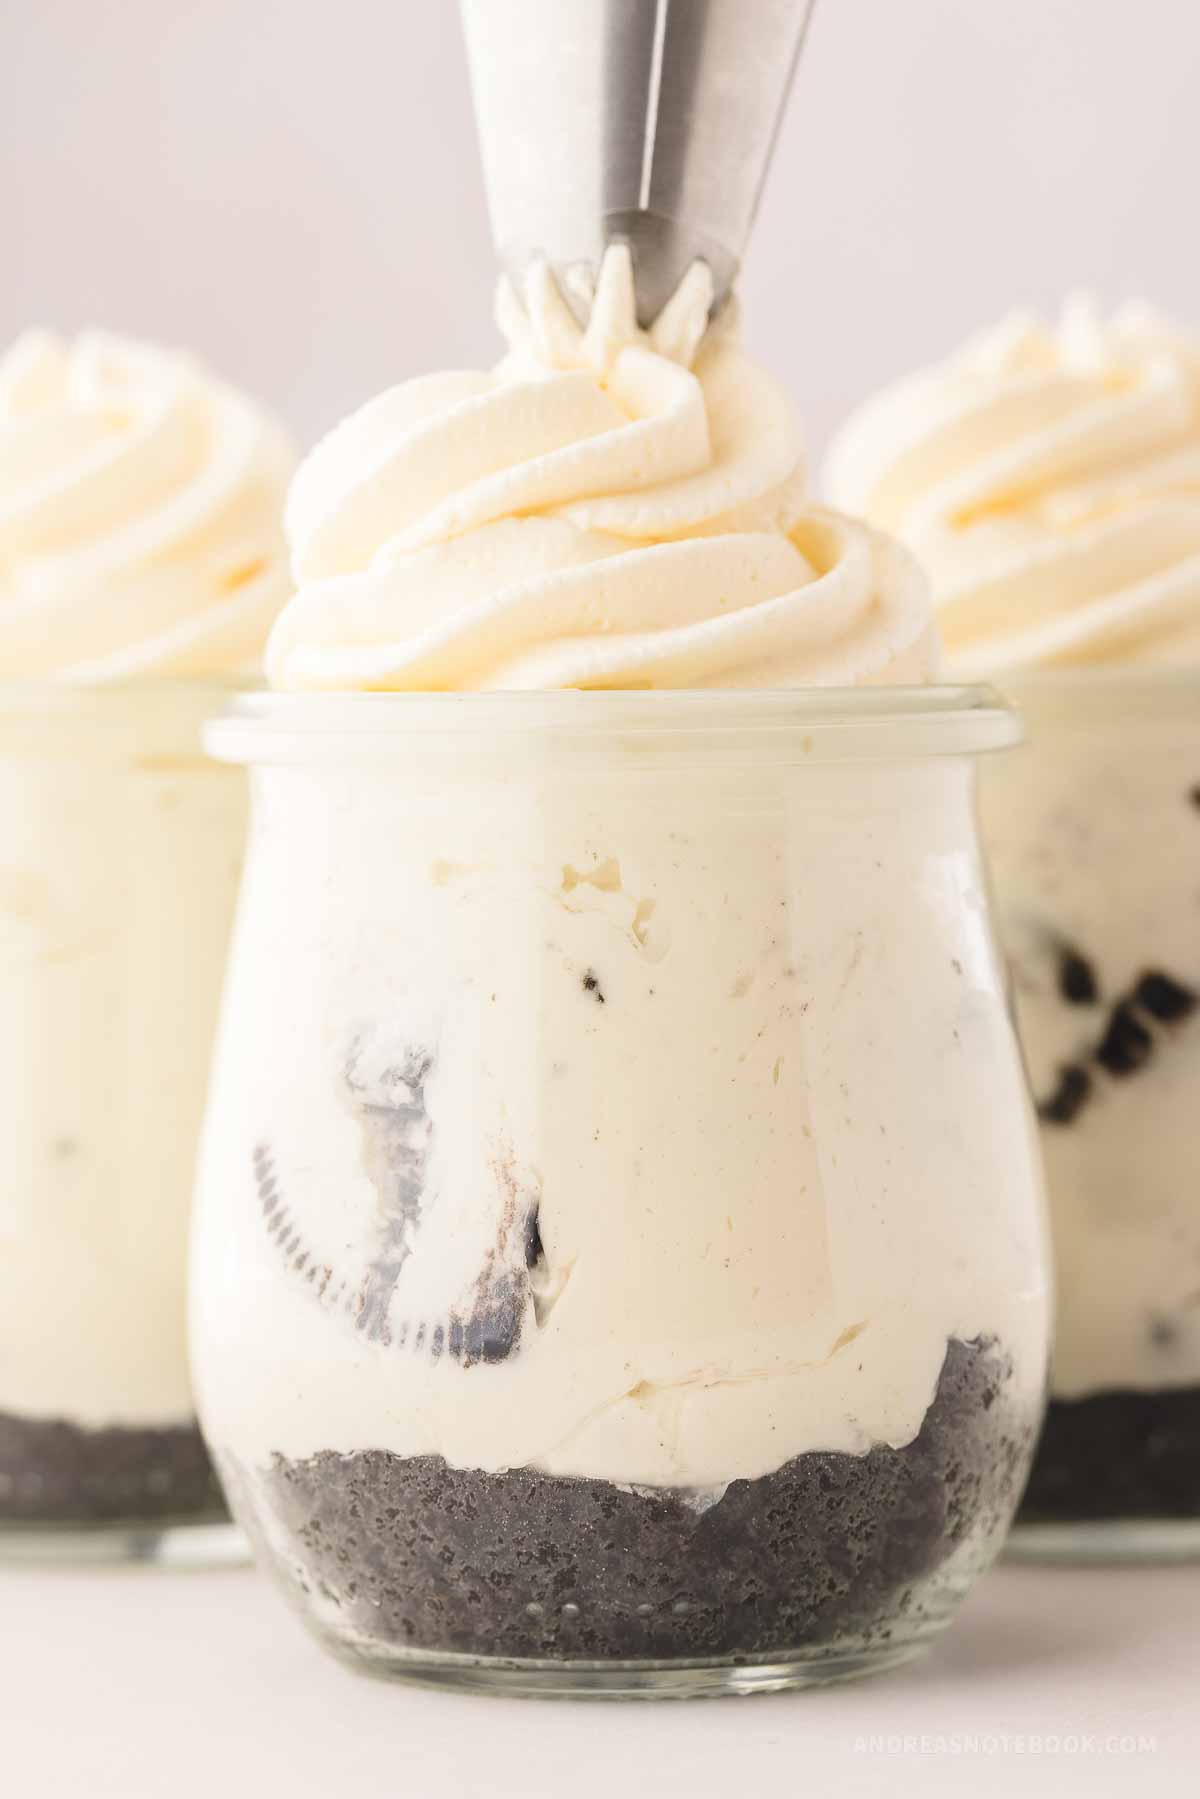 Whipping cream being piped onto the top of an Oreo cheesecake in a jar.